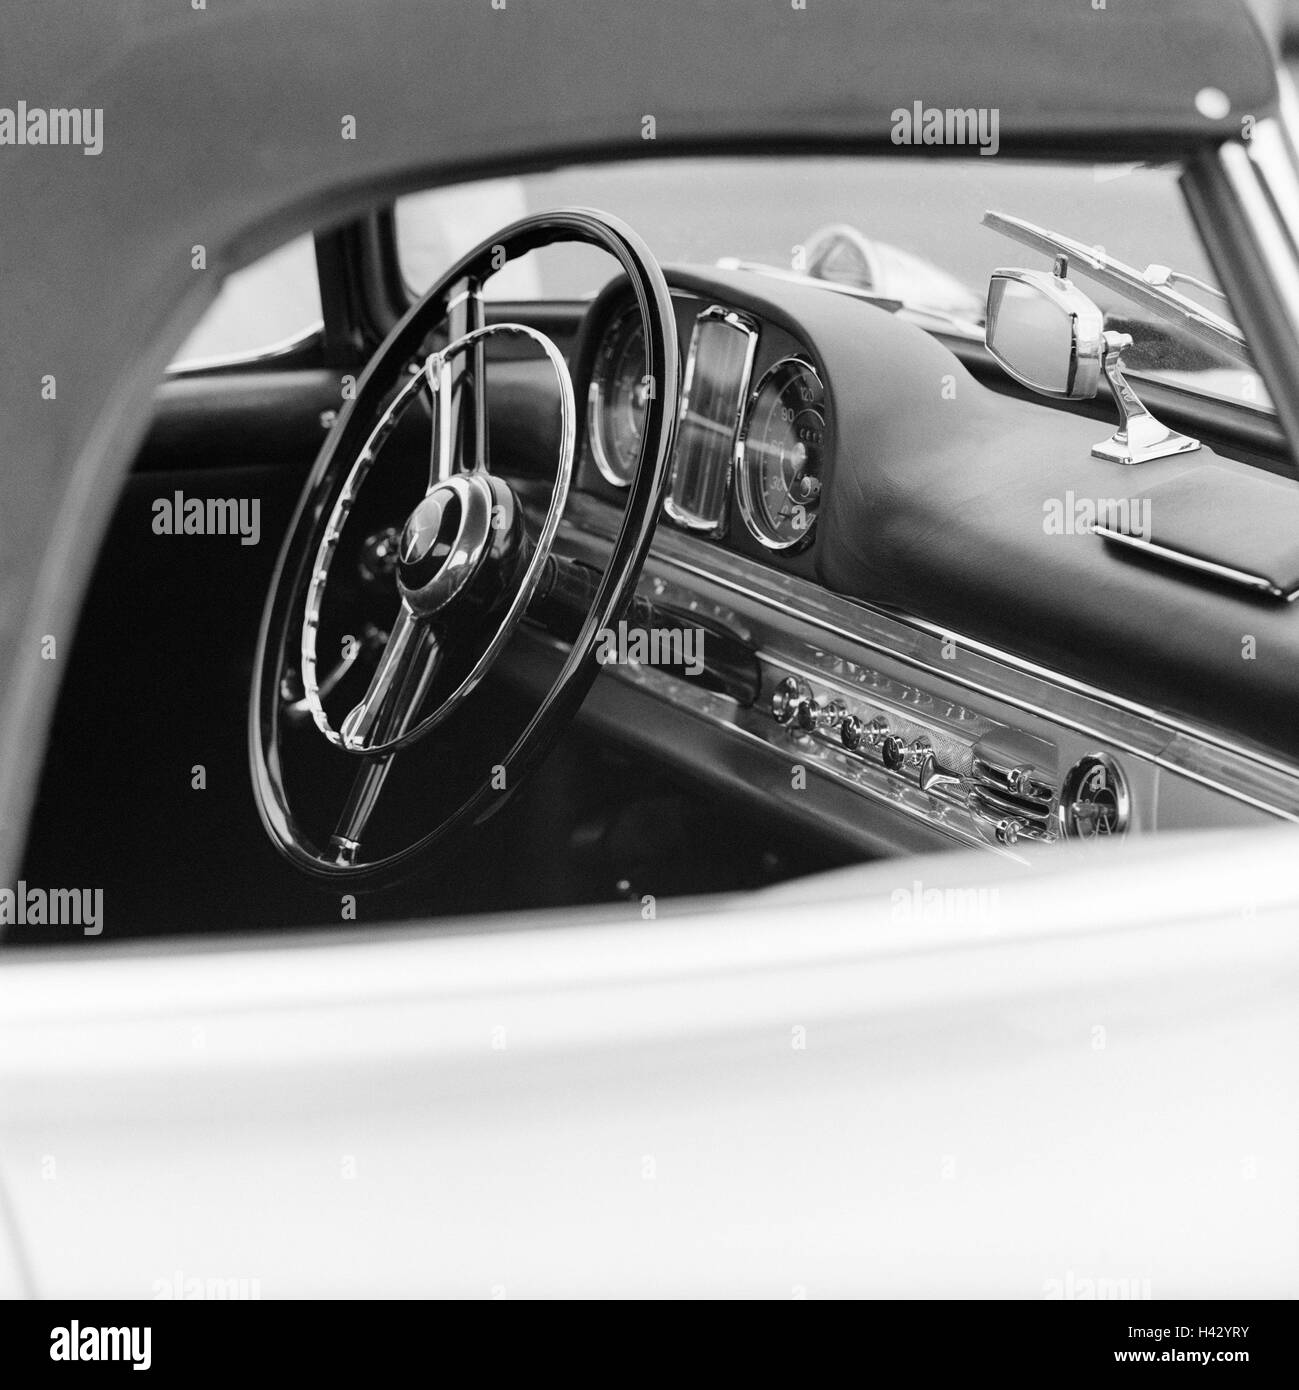 Car, old-timer, Mercedes, cabriolet, detail, cockpit, tax, dash board, b/w, only editorially! Vehicle, passenger car, historically, nostalgically, nostalgia, old, in an old-fashioned way, producer, Mercedes Benz, Collector's item, expensive, exclusively, Stock Photo